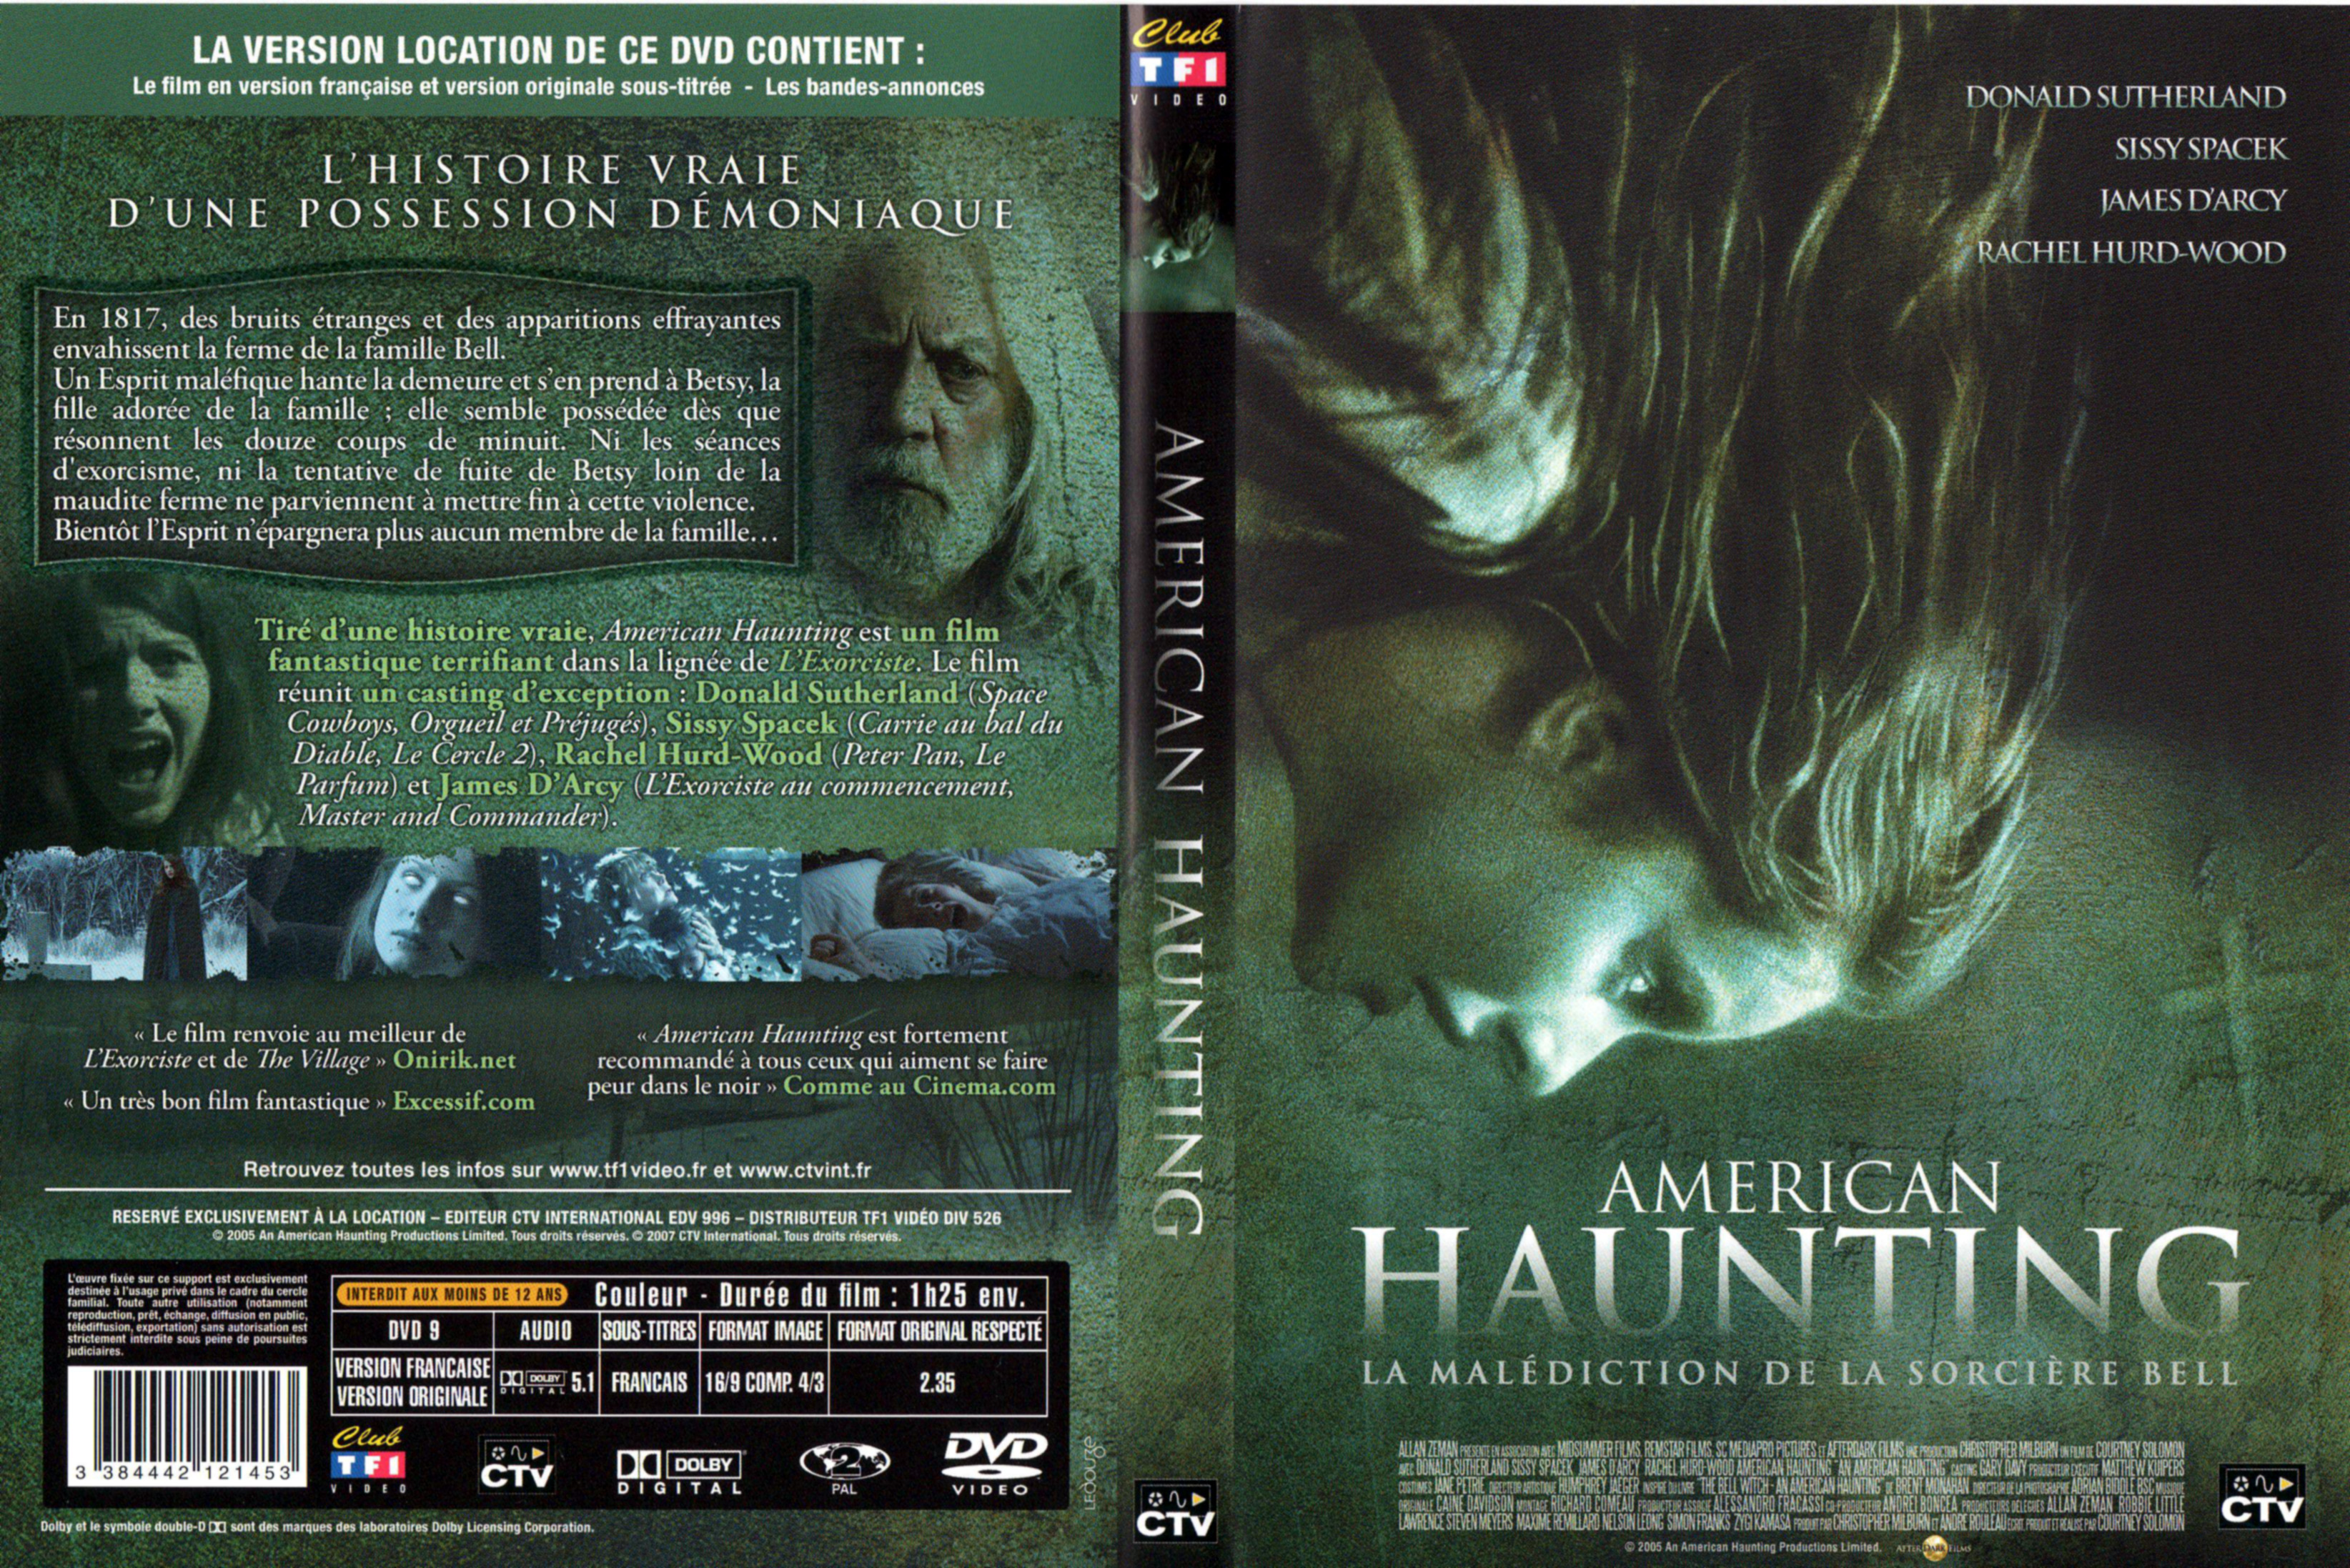 Jaquette DVD American haunting